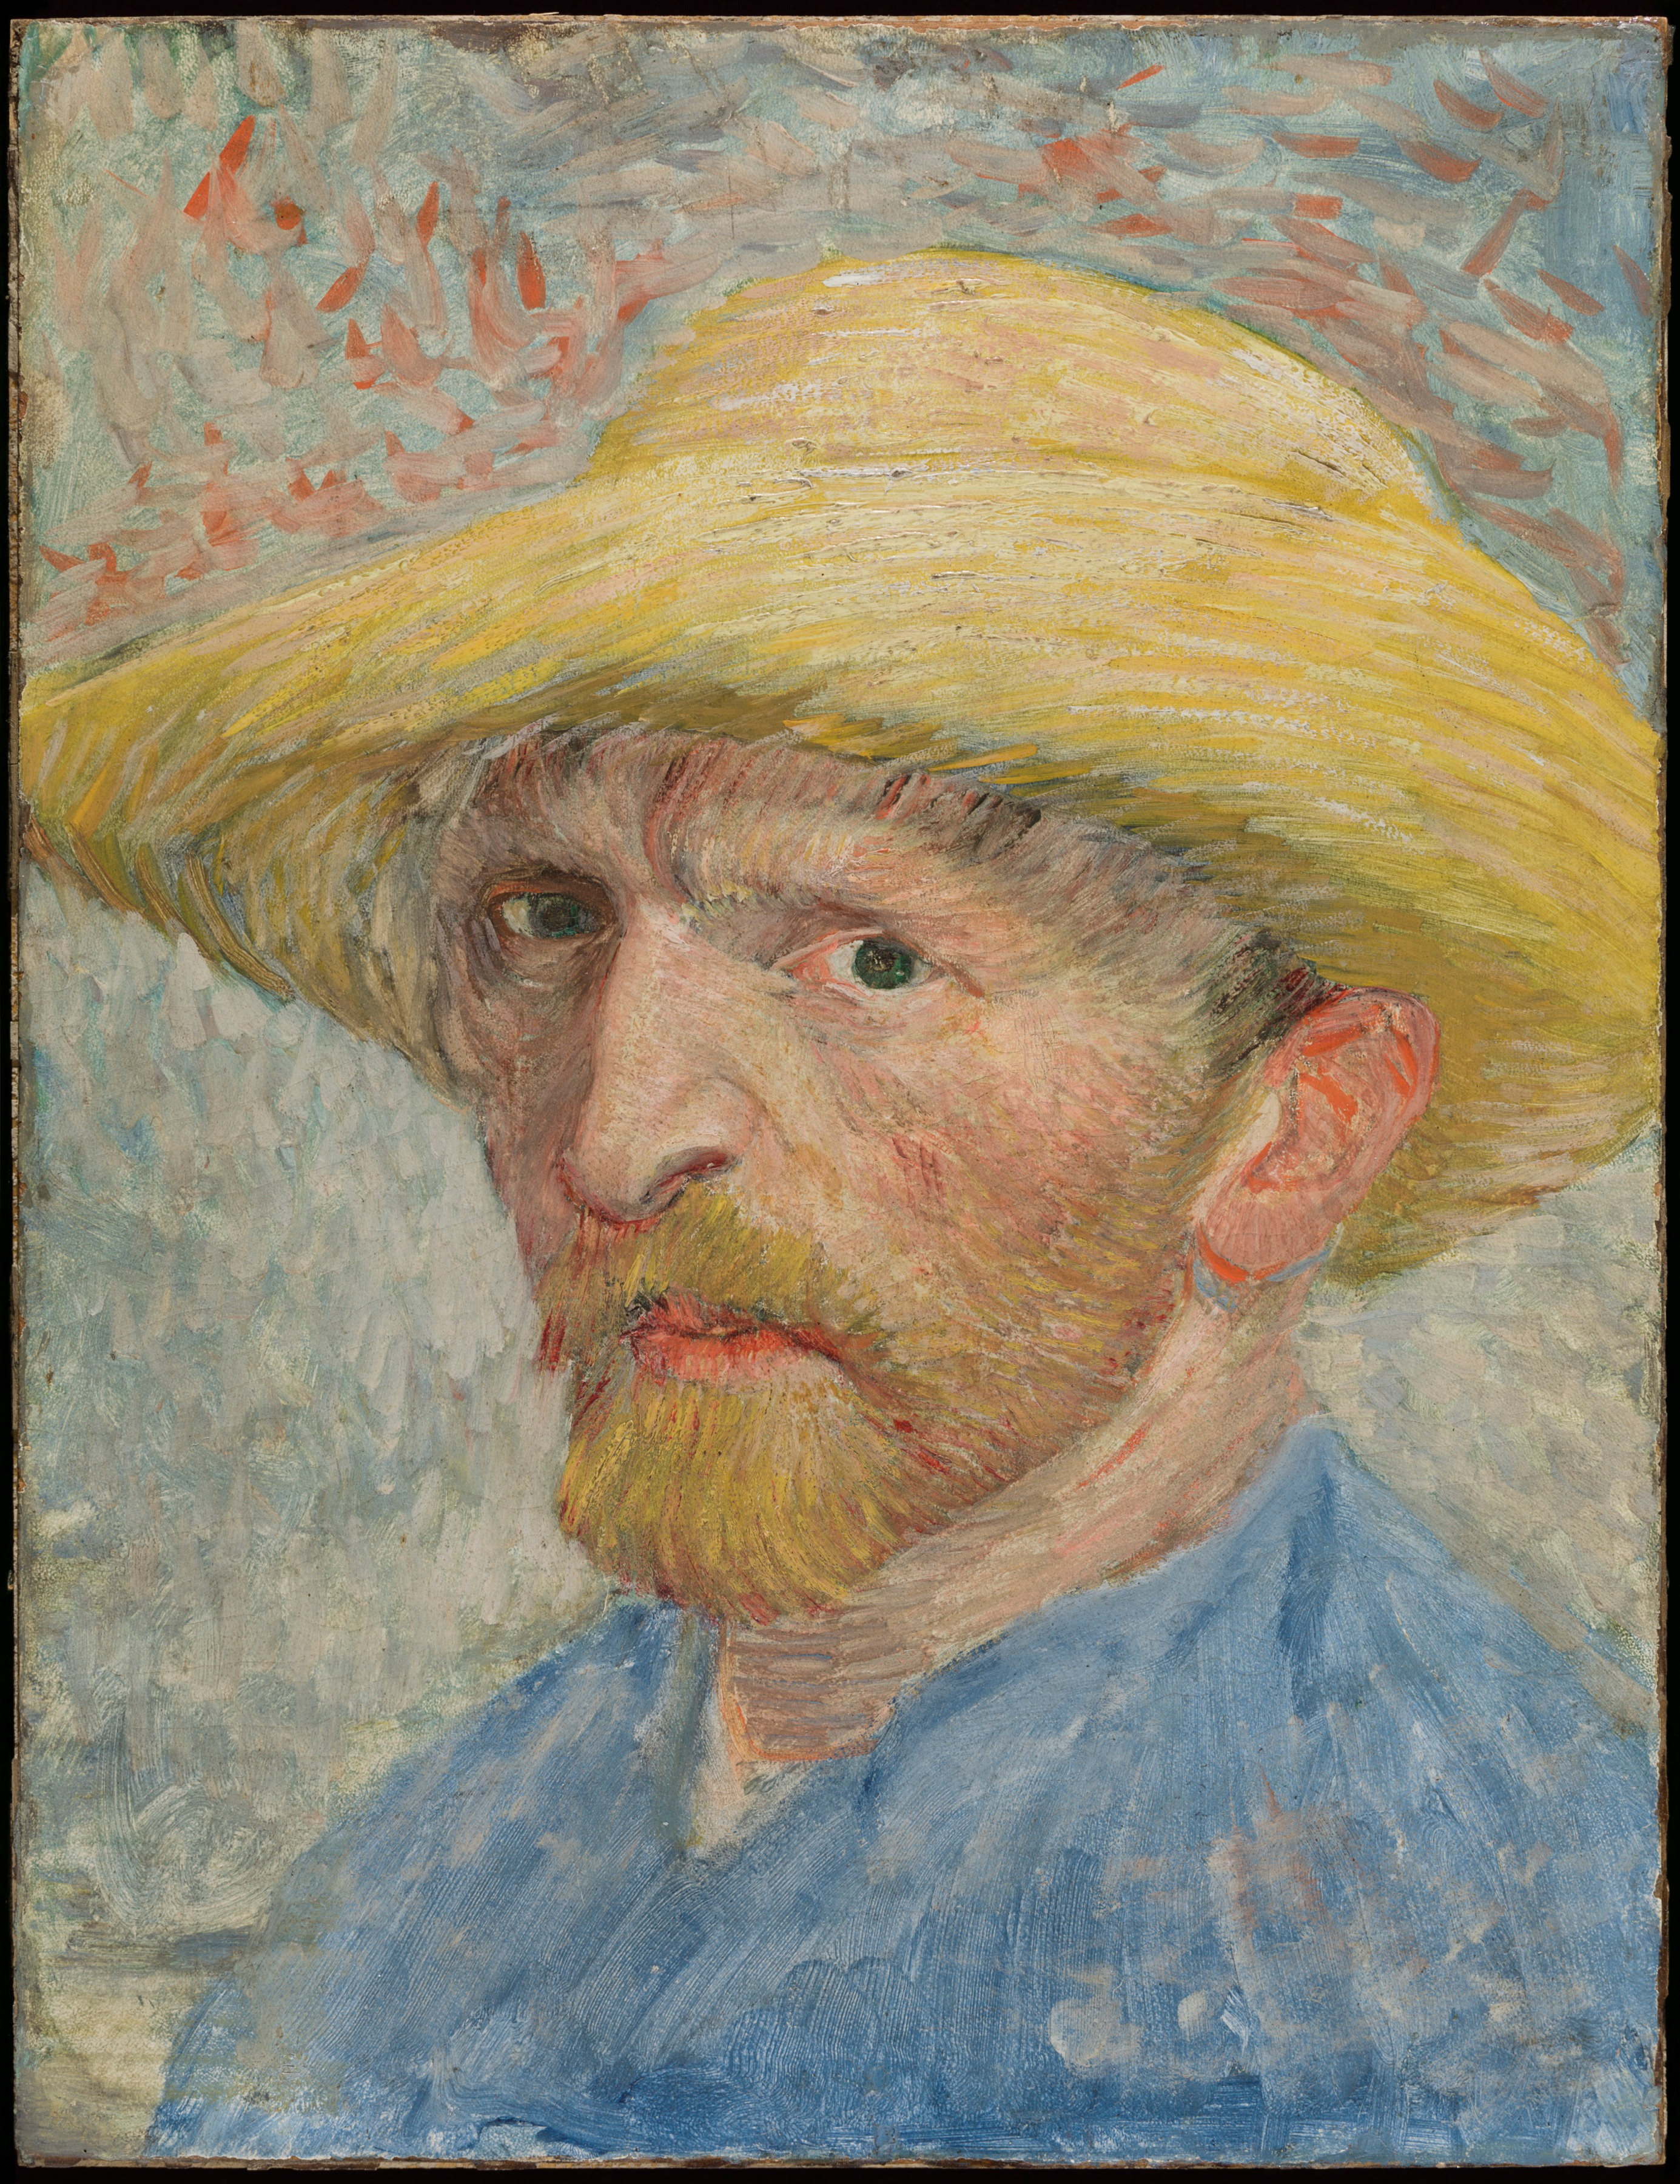 Self-portrait with straw hat, 1887 painting by Vincent van Gogh (1853-1890) obtained on June 30, 2021. Courtesy of The Courtauld/Handout via REUTERS THIS IMAGE HAS BEEN SUPPLIED BY A THIRD PARTY. NO NEW USES AFTER JULY 30, 2021.